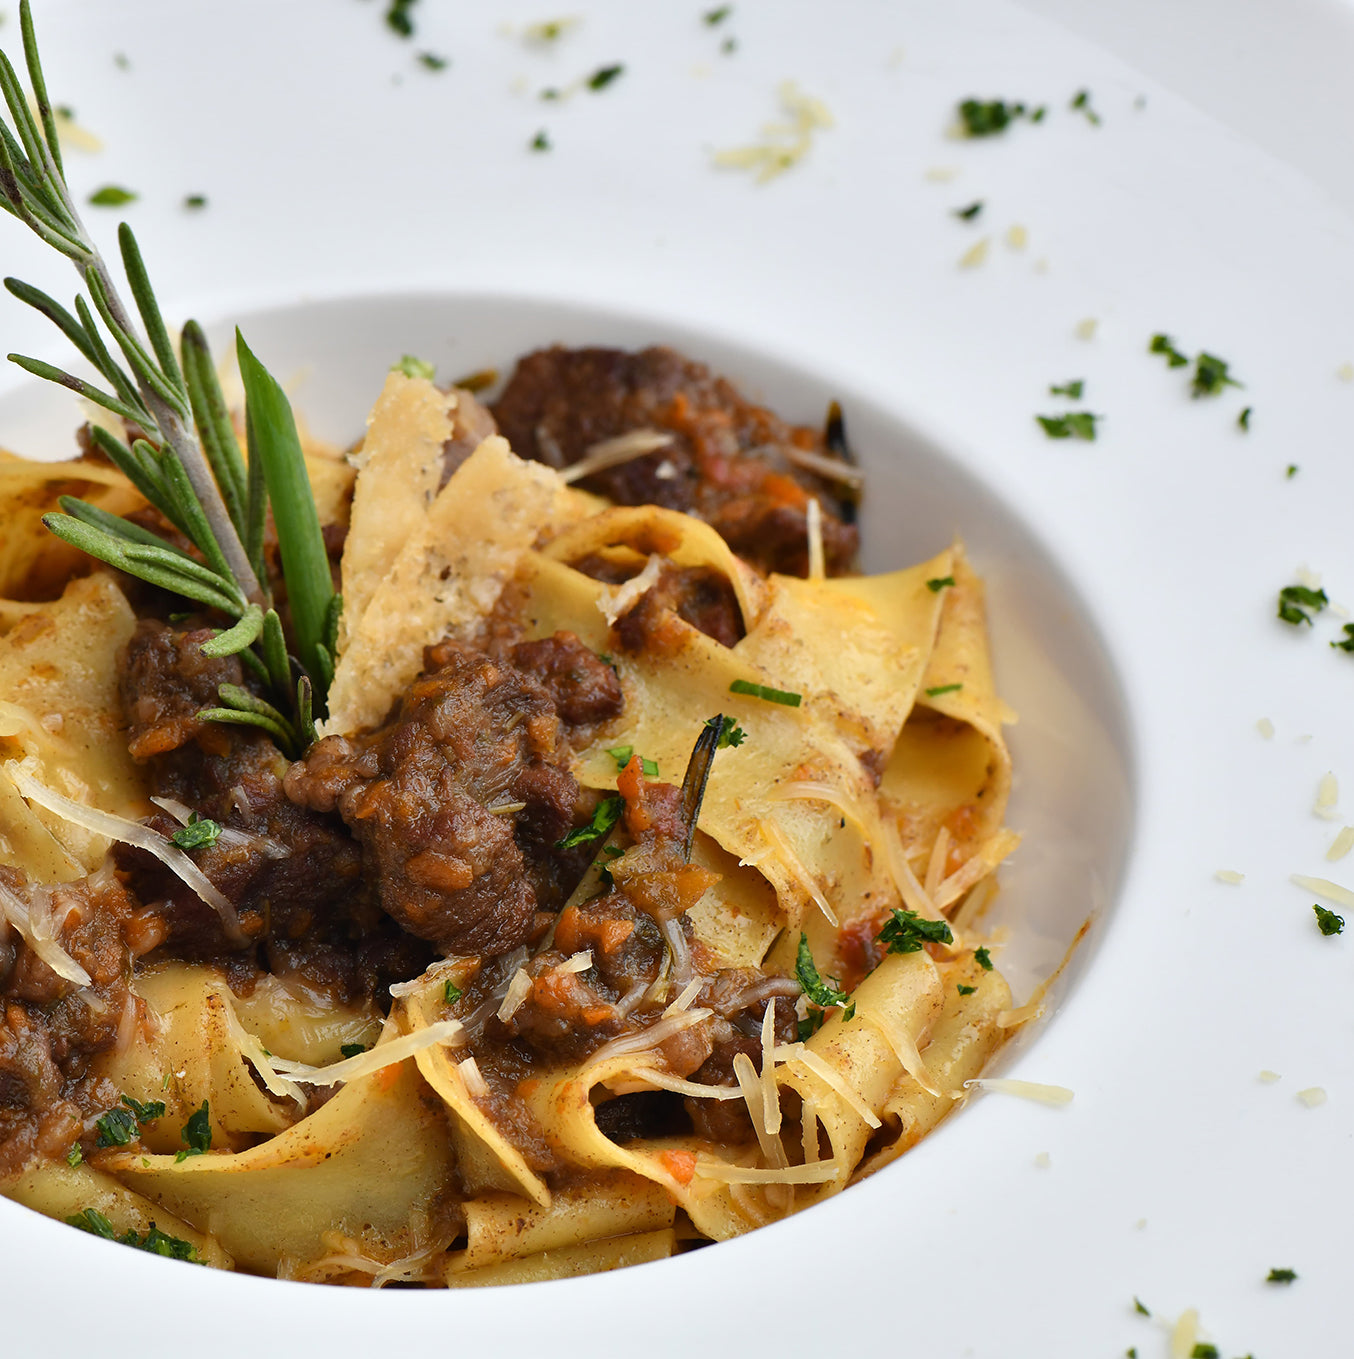 ”Pappardelle